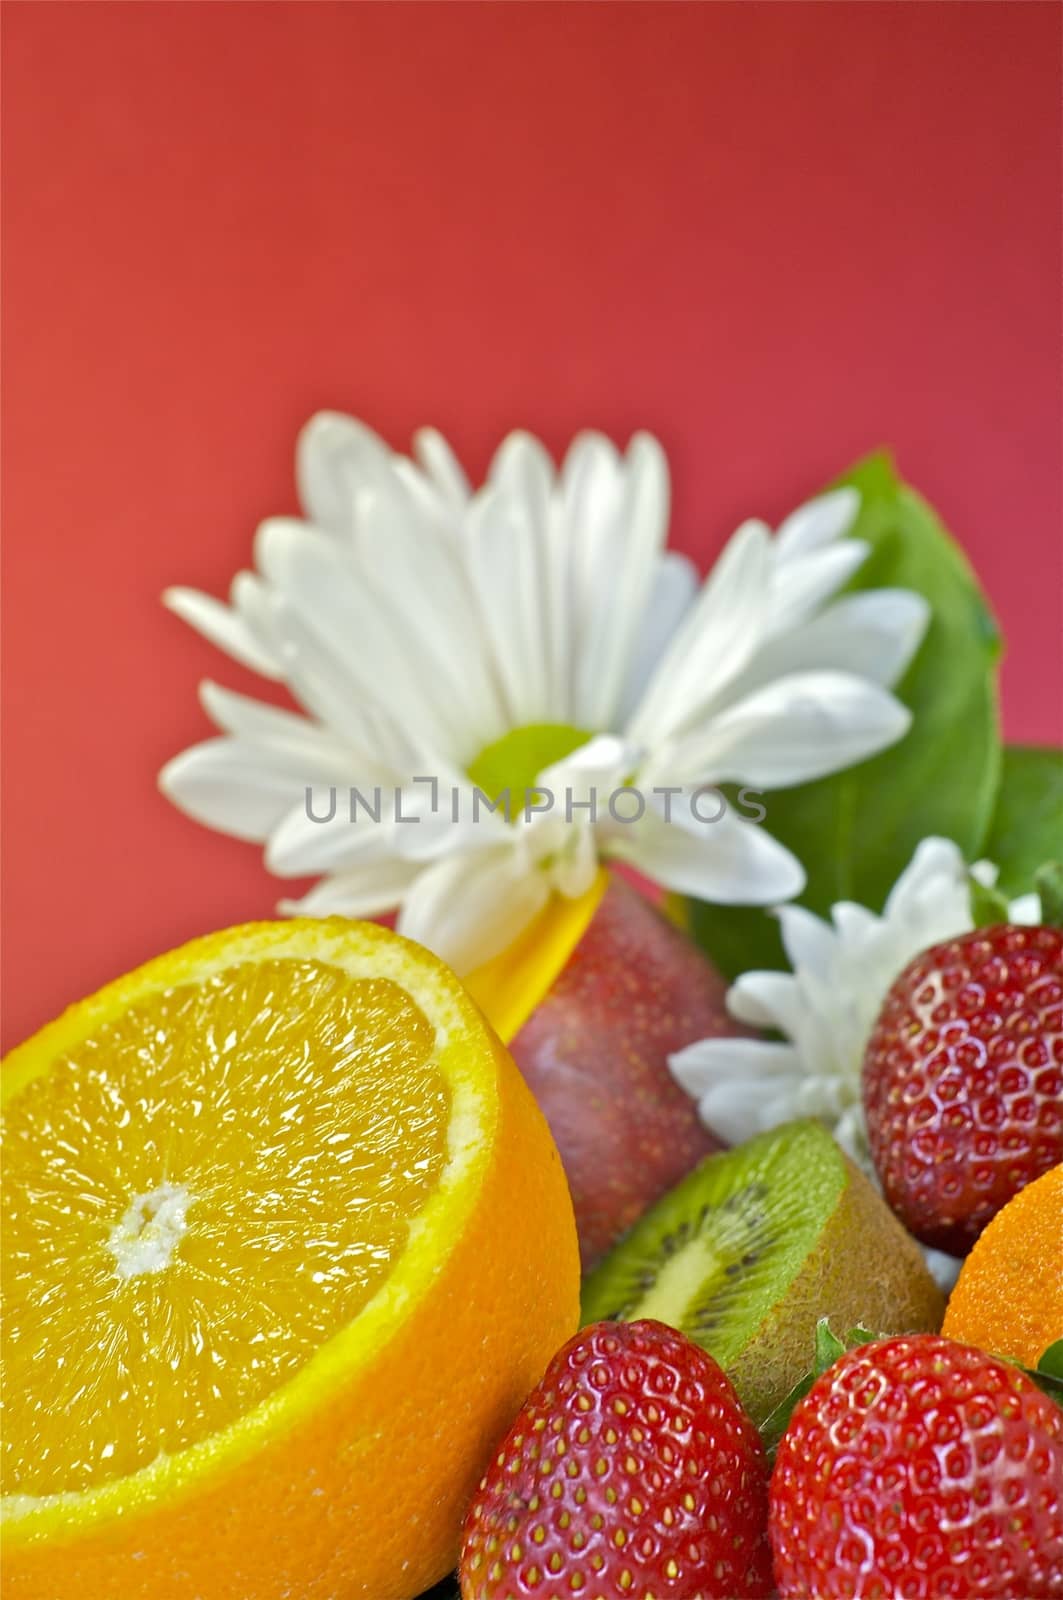 Fruits on the Red Background. Fruits and Flower Composition. Vertical Photo